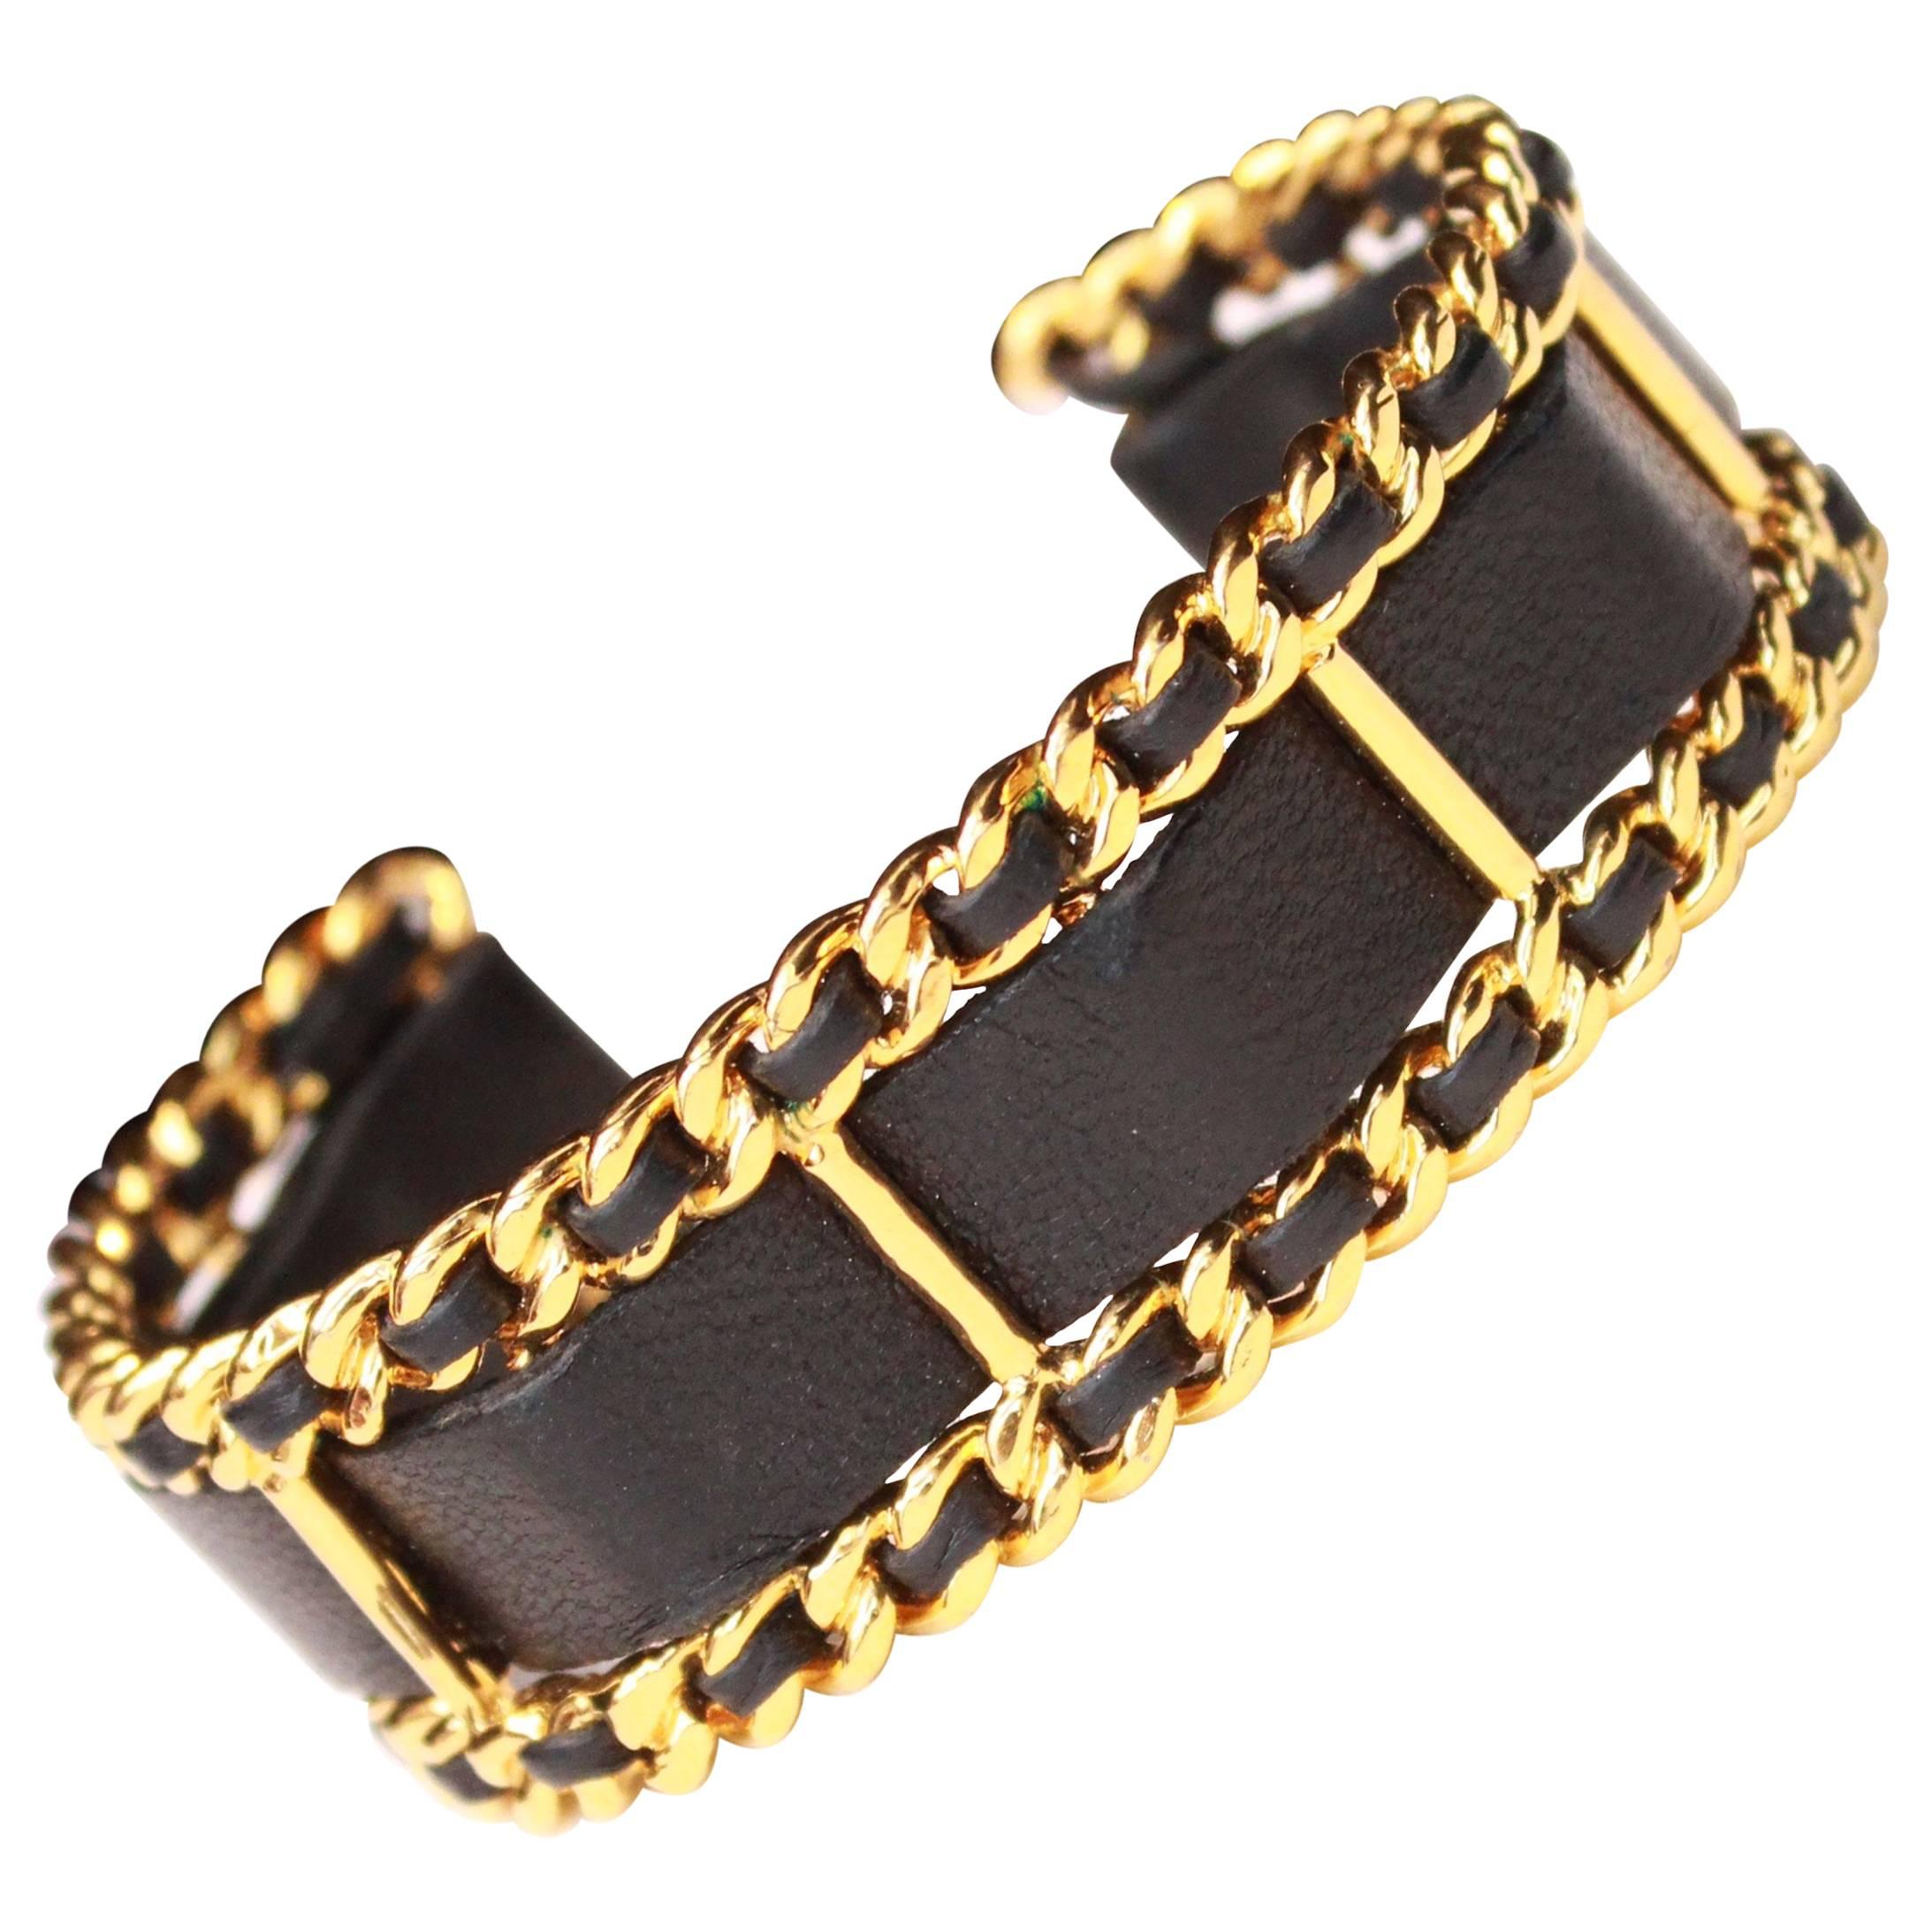 1990s Chanel black leather and and chain bangle cuff bracelet